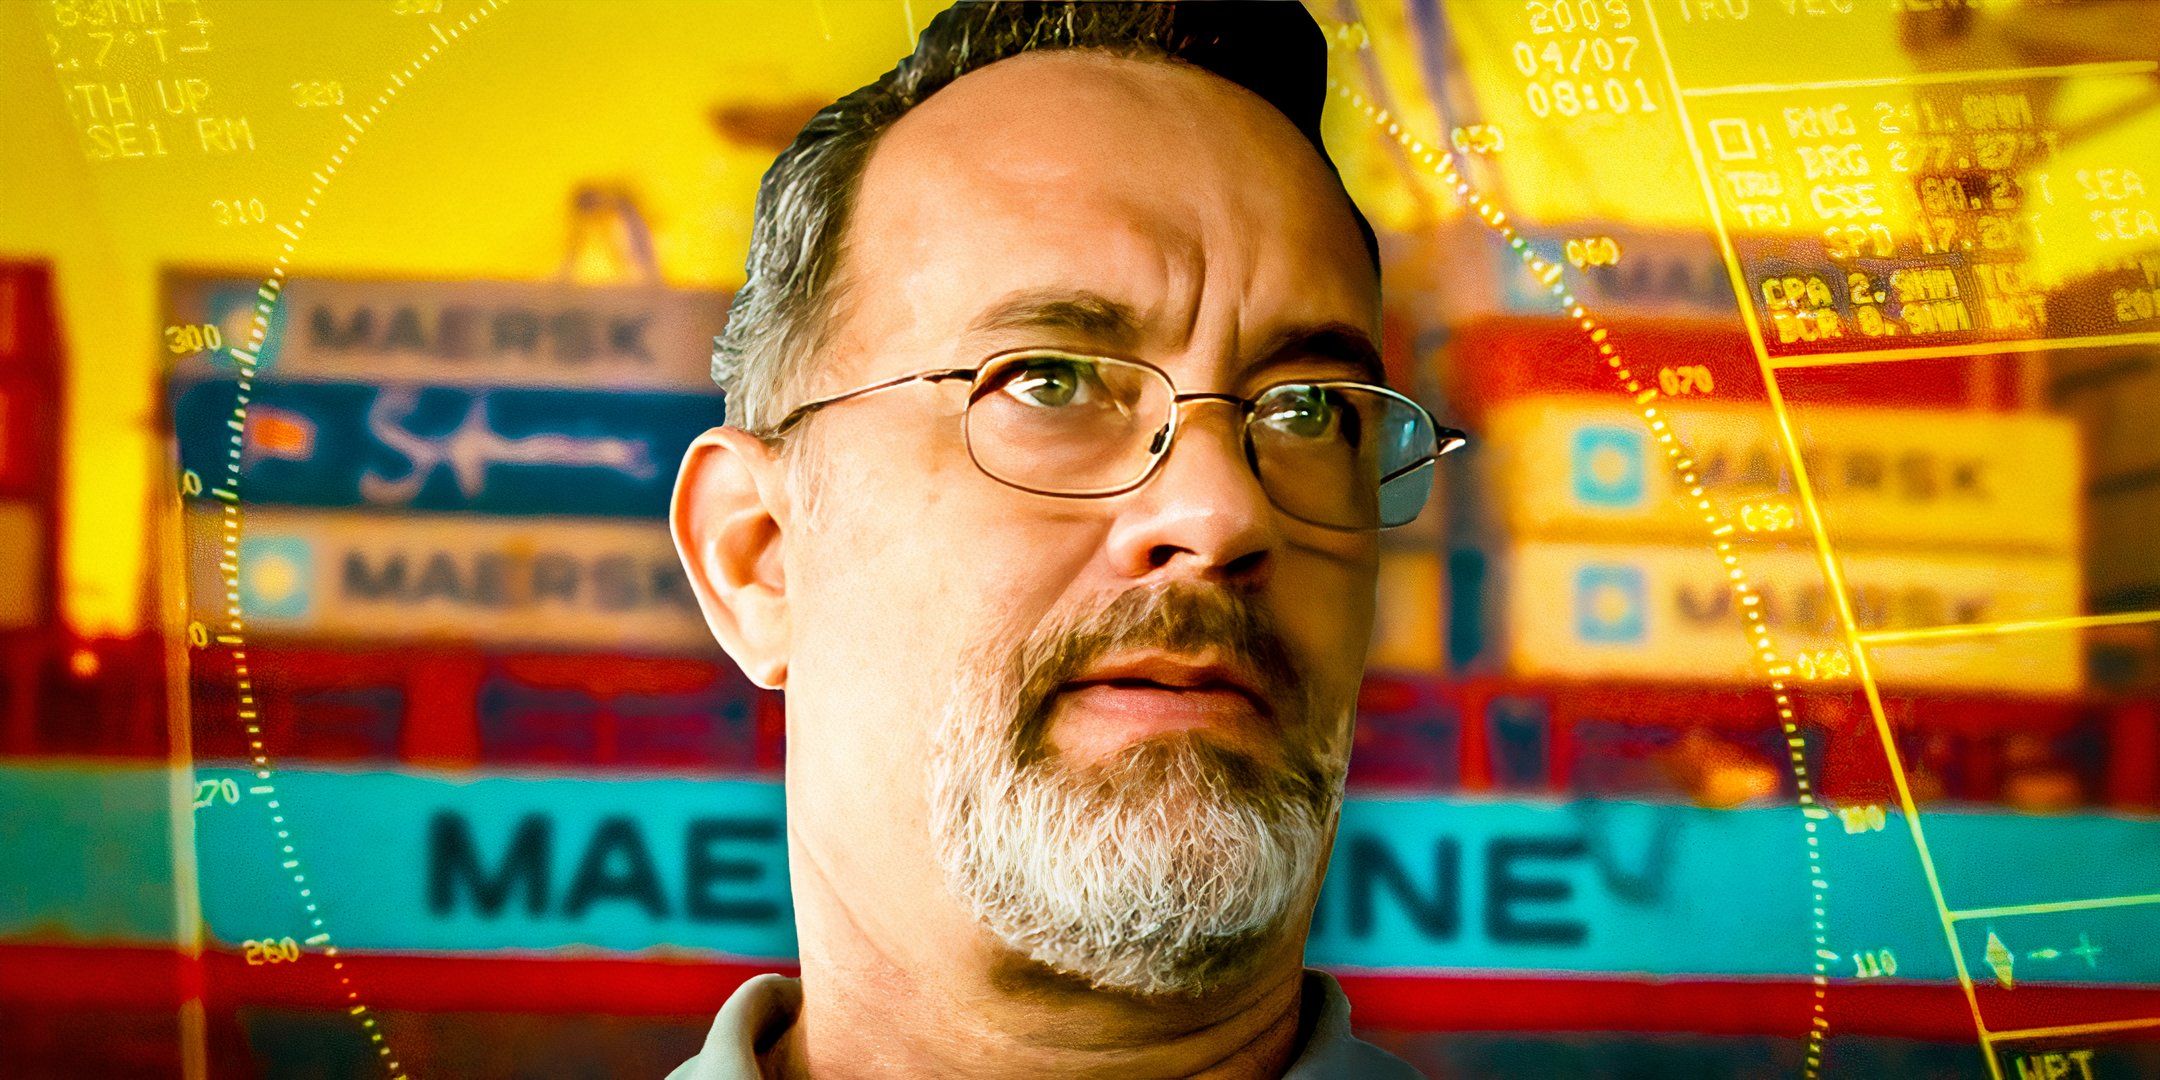 The True Story Behind Captain Phillips & The Maersk Alabama Hijacking